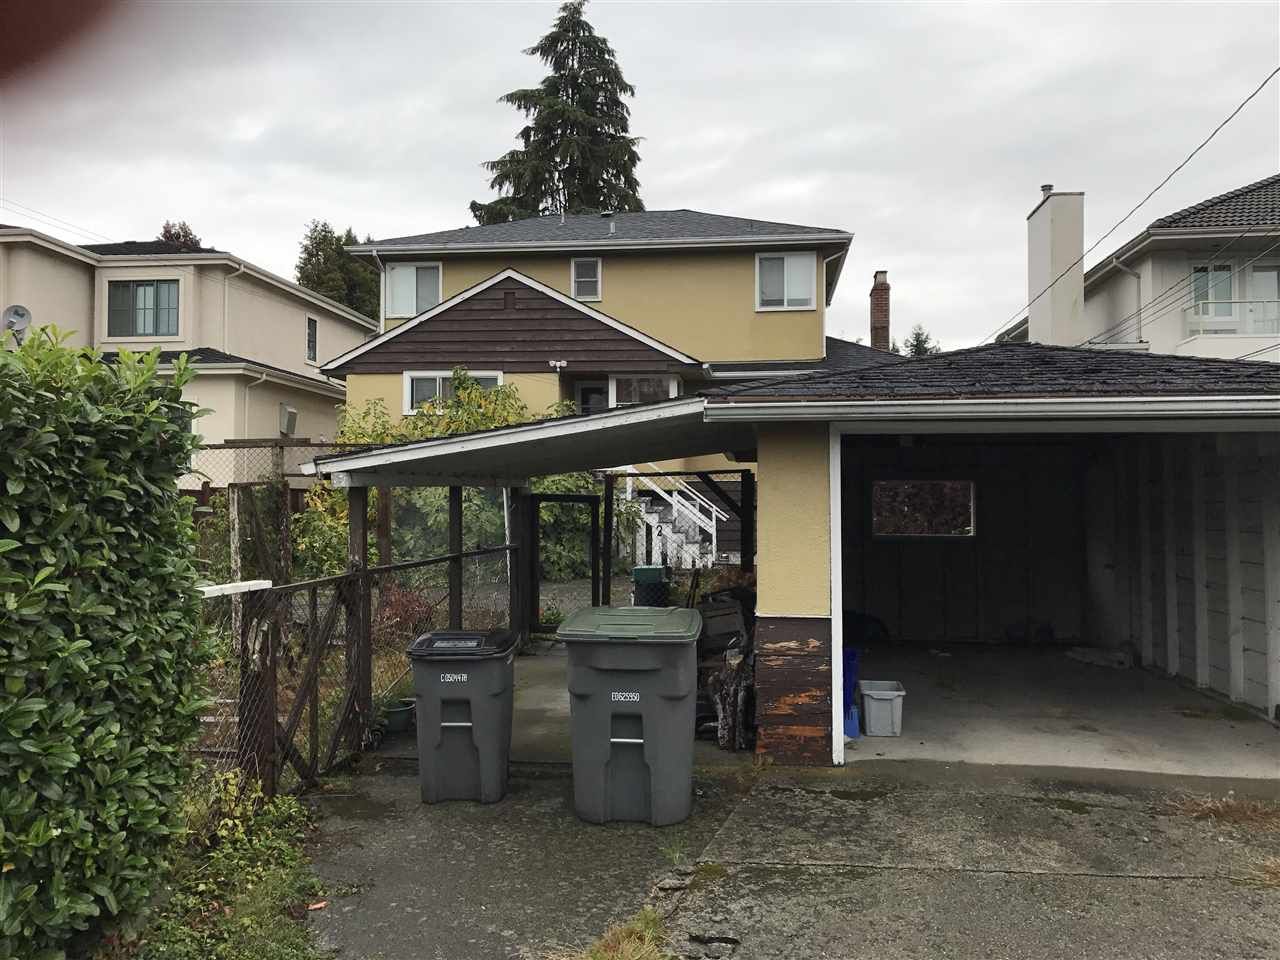 Photo 3: Photos: 2022 W 61ST Avenue in Vancouver: S.W. Marine House for sale (Vancouver West)  : MLS®# R2216054